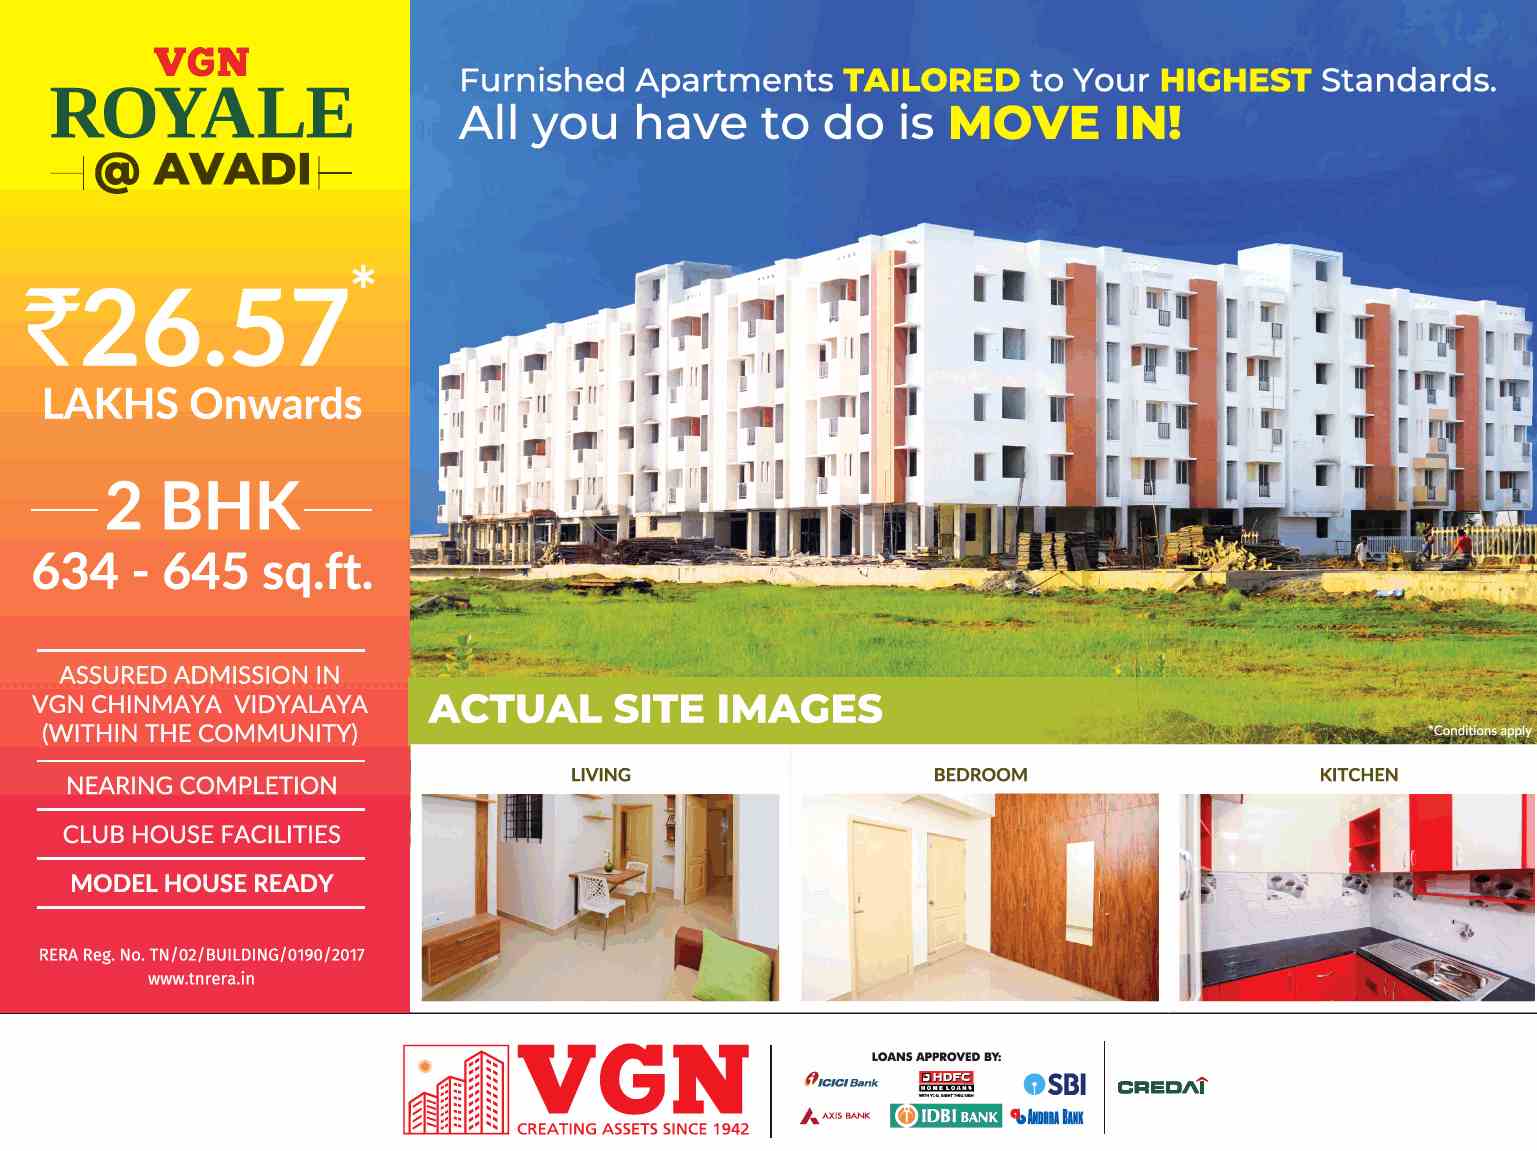 Model house ready for visit at VGN Royale in Chennai Update